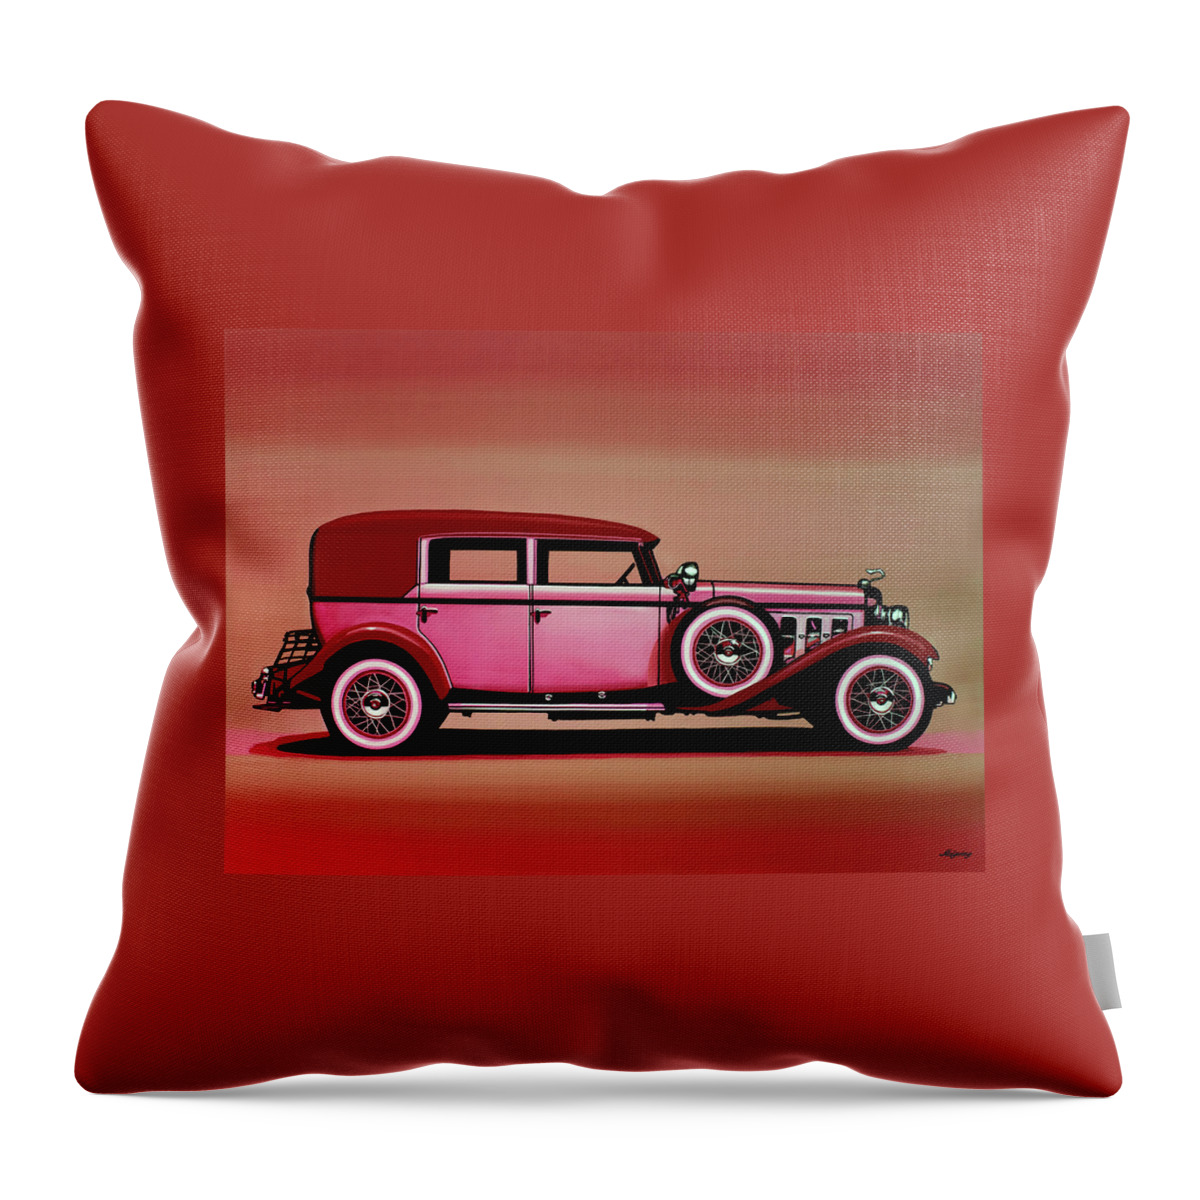 Cadillac V-16 Throw Pillow featuring the mixed media Cadillac V16 Mixed Media by Paul Meijering